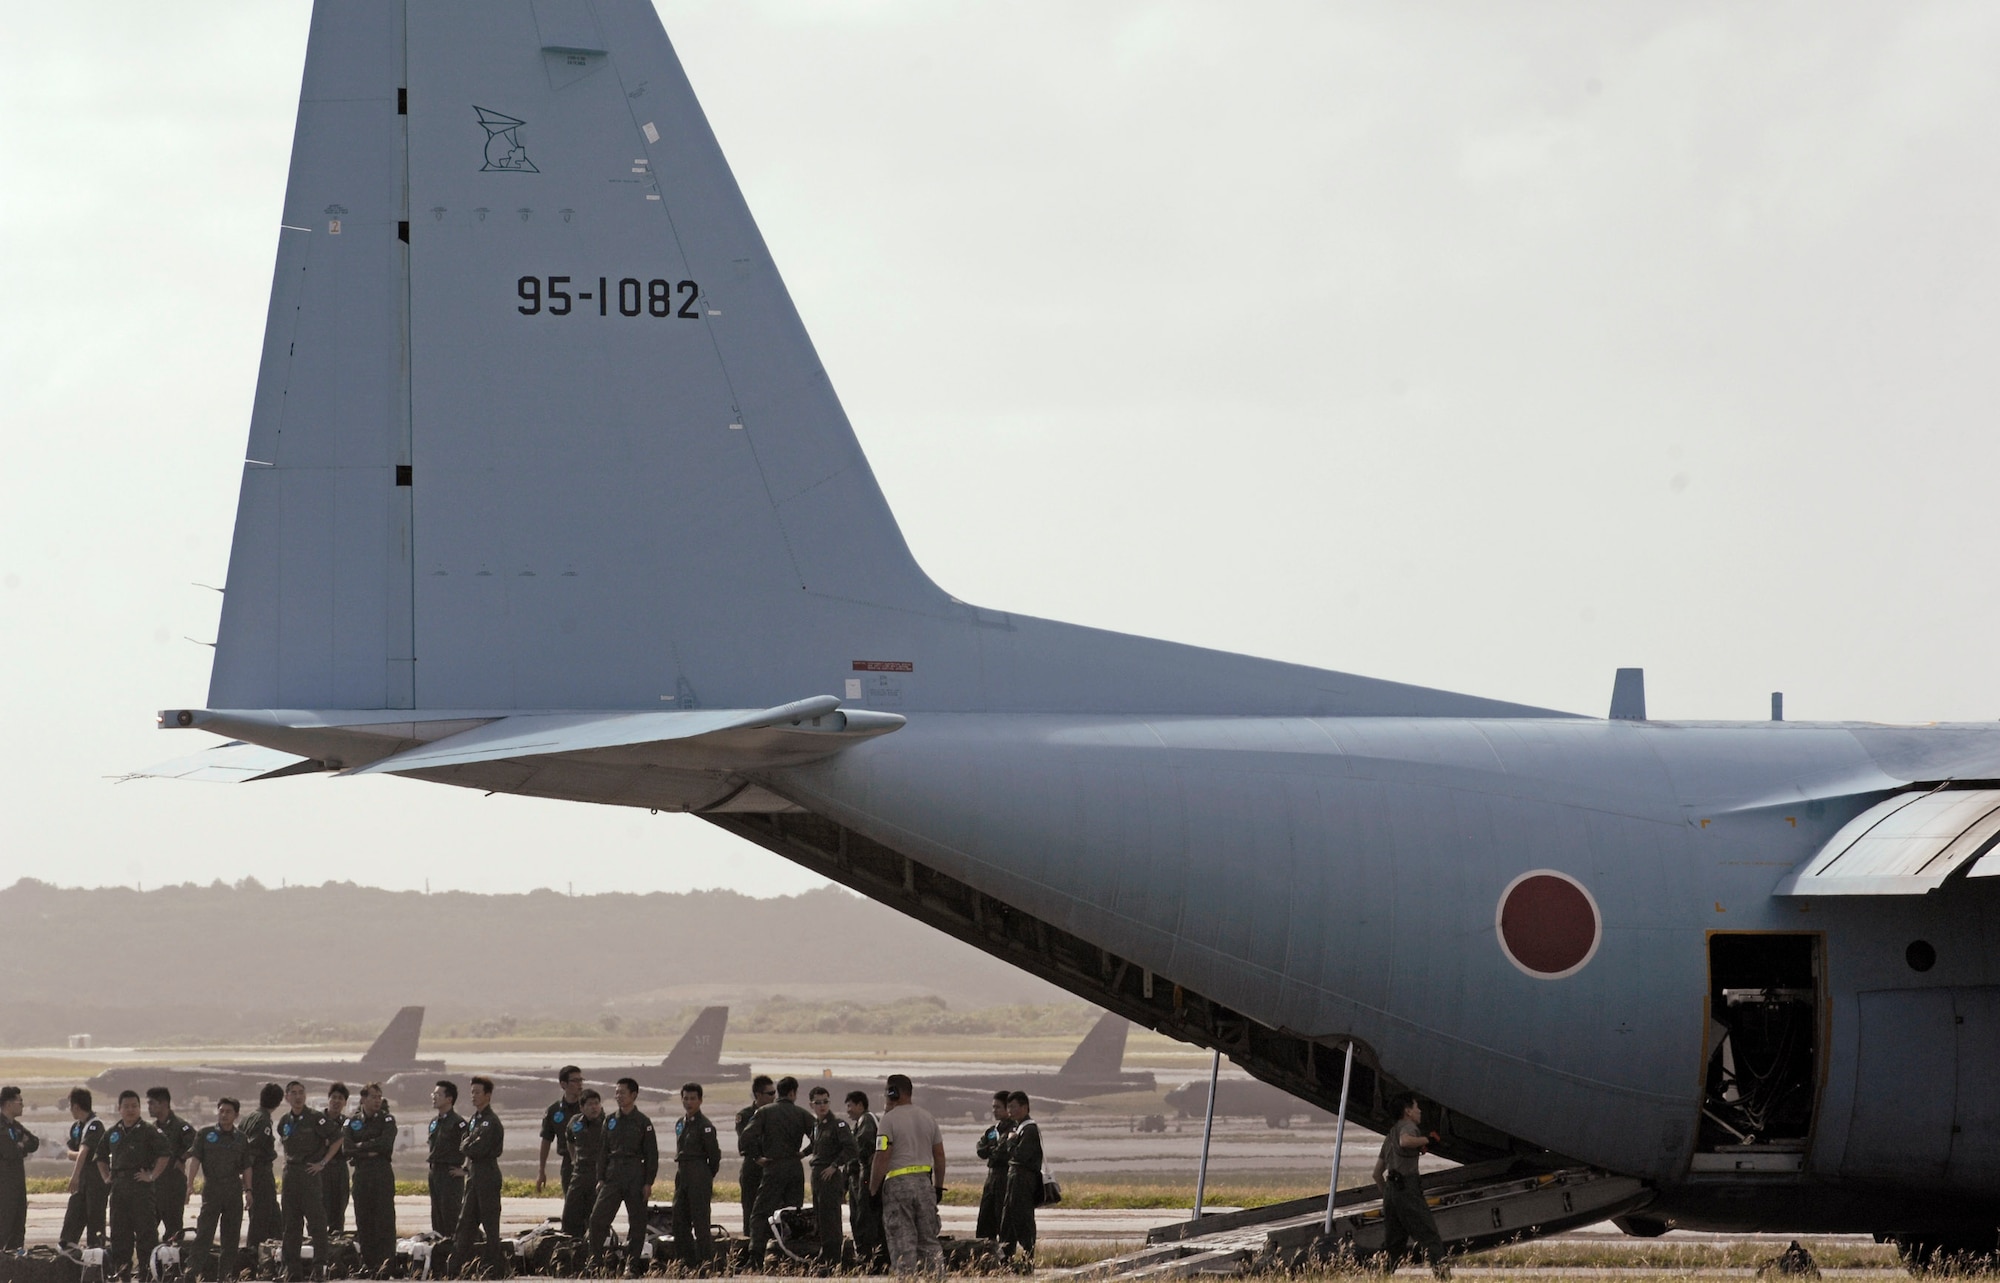 Japan Air Self Defense Force members wait outside of their C-130 after arriving Jan. 27 at Andersen Air Force Base, Guam. More than 60 JASDF members arrived in three C-130s to participate in Exercise Cope North 09-1, a regularly scheduled exercise scheduled for Feb. 2 through 13. Cope North is designed to enhance U.S. and Japanese air operations in defense of Japan. JASDF F-2s from Tsuiki Air Base, Japan, and E-2Cs from Misawa AB, Japan, will join forward deployed U.S. Air Force F-16 Fighting Falcons from Eielson Air Force Base, Alaska, B-52 Stratofortress' currently deployed to Andersen AFB, and Navy EA-6B from VAQ-136 Carrier Air Wing Five, Atsugi, Japan, will participate in this year's exercise with a focus on interoperability. (U.S. Air Force photo/Master Sgt. Kevin J. Gruenwald) 
